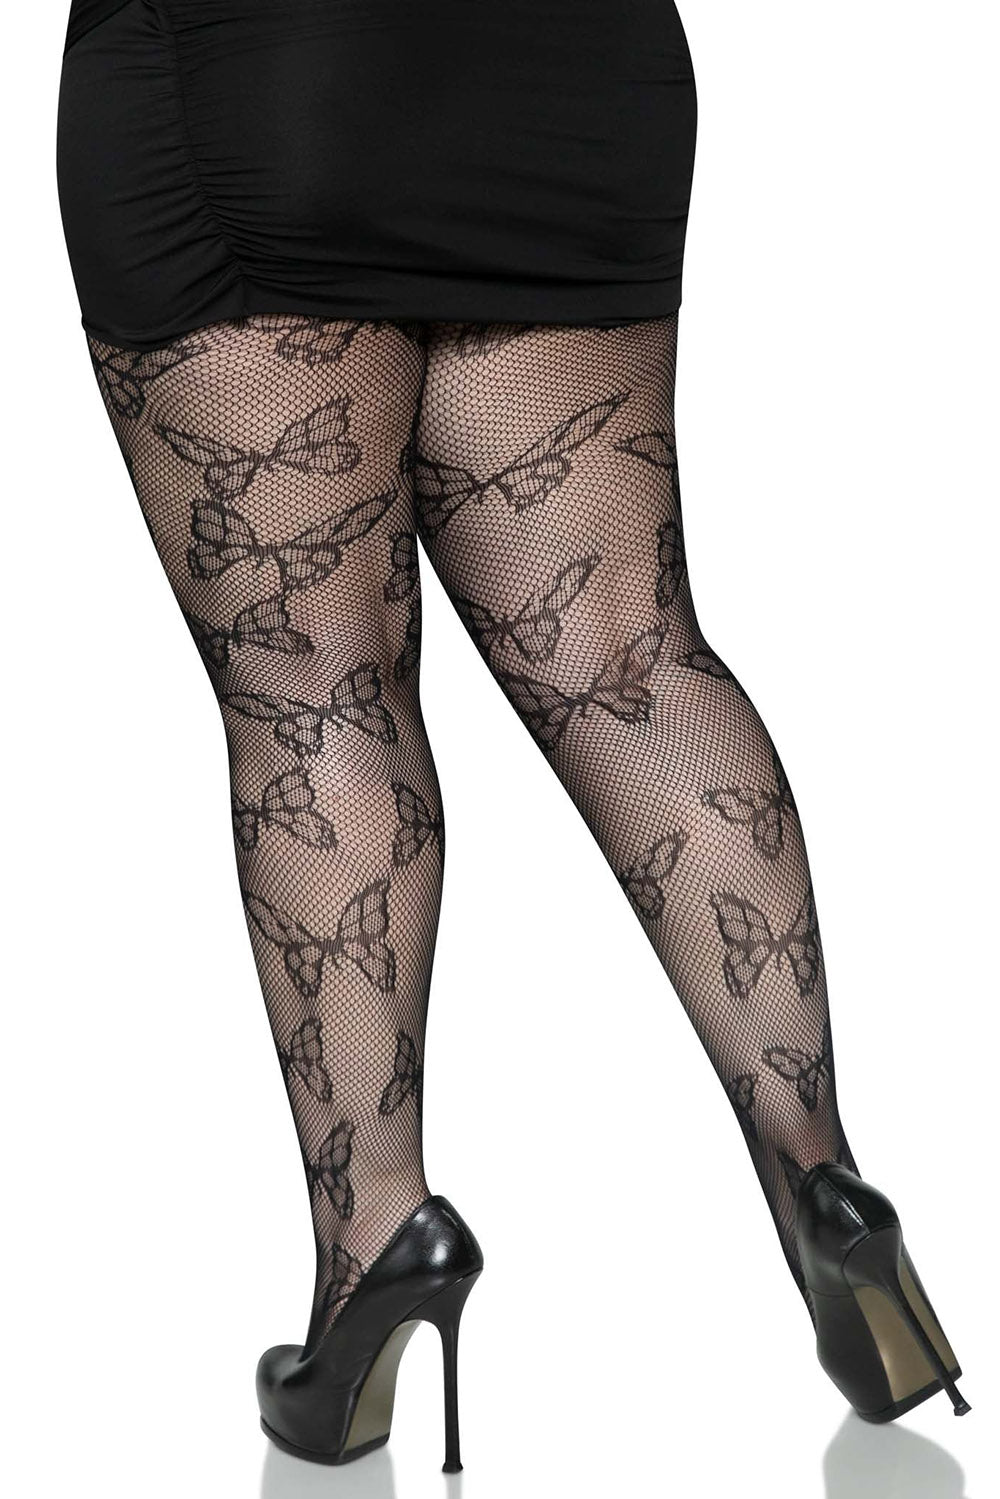 Black Monarch Butterfly Tight [PLUS SIZE]